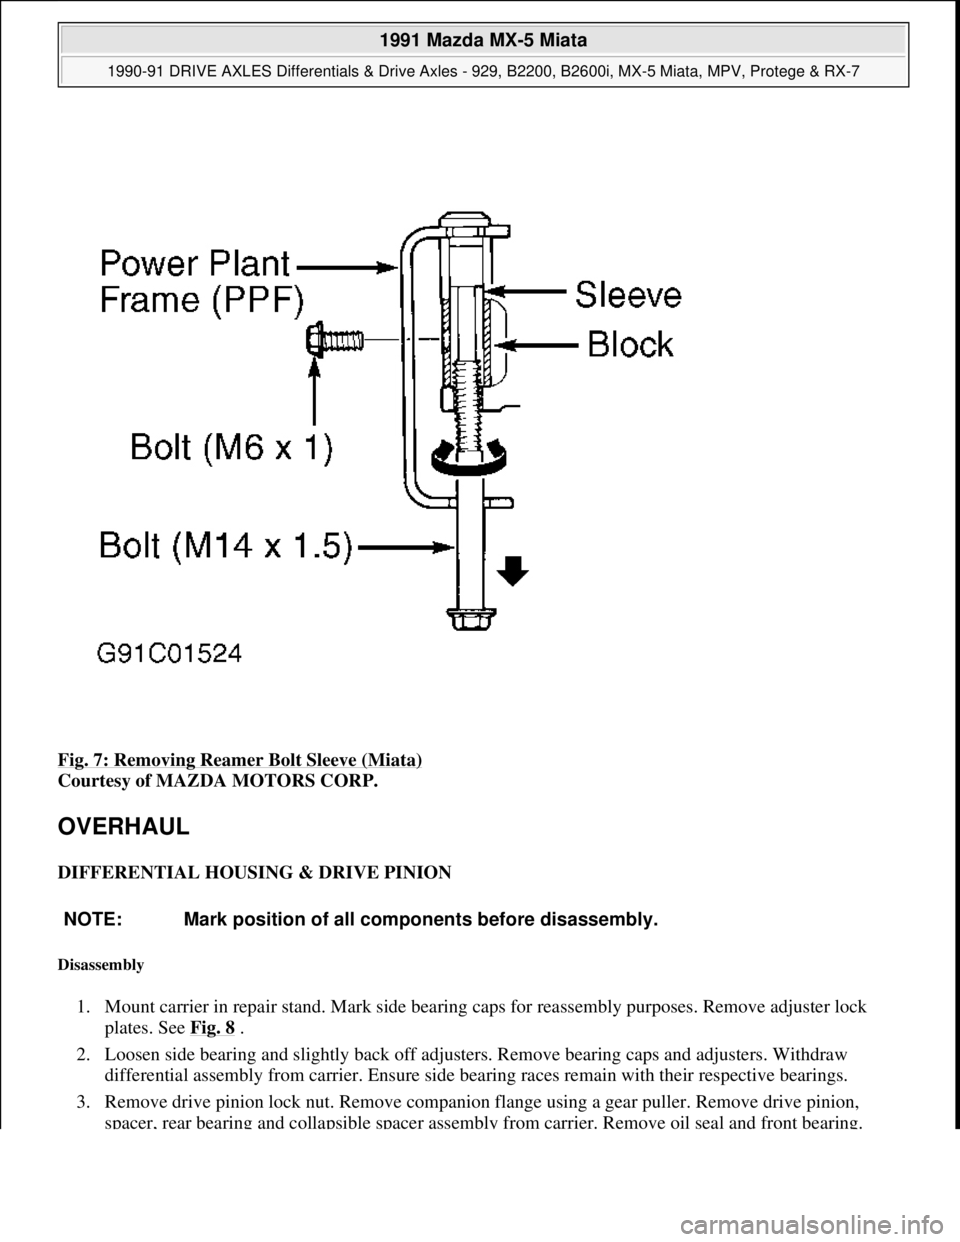 MAZDA MIATA 1991  Factory Service Manual Fig. 7: Removing Reamer Bolt Sleeve (Miata) 
Courtesy of MAZDA MOTORS CORP. 
OVERHAUL 
DIFFERENTIAL HOUSING & DRIVE PINION 
Disassembly 
1. Mount carrier in repair stand. Mark side bearing caps for re